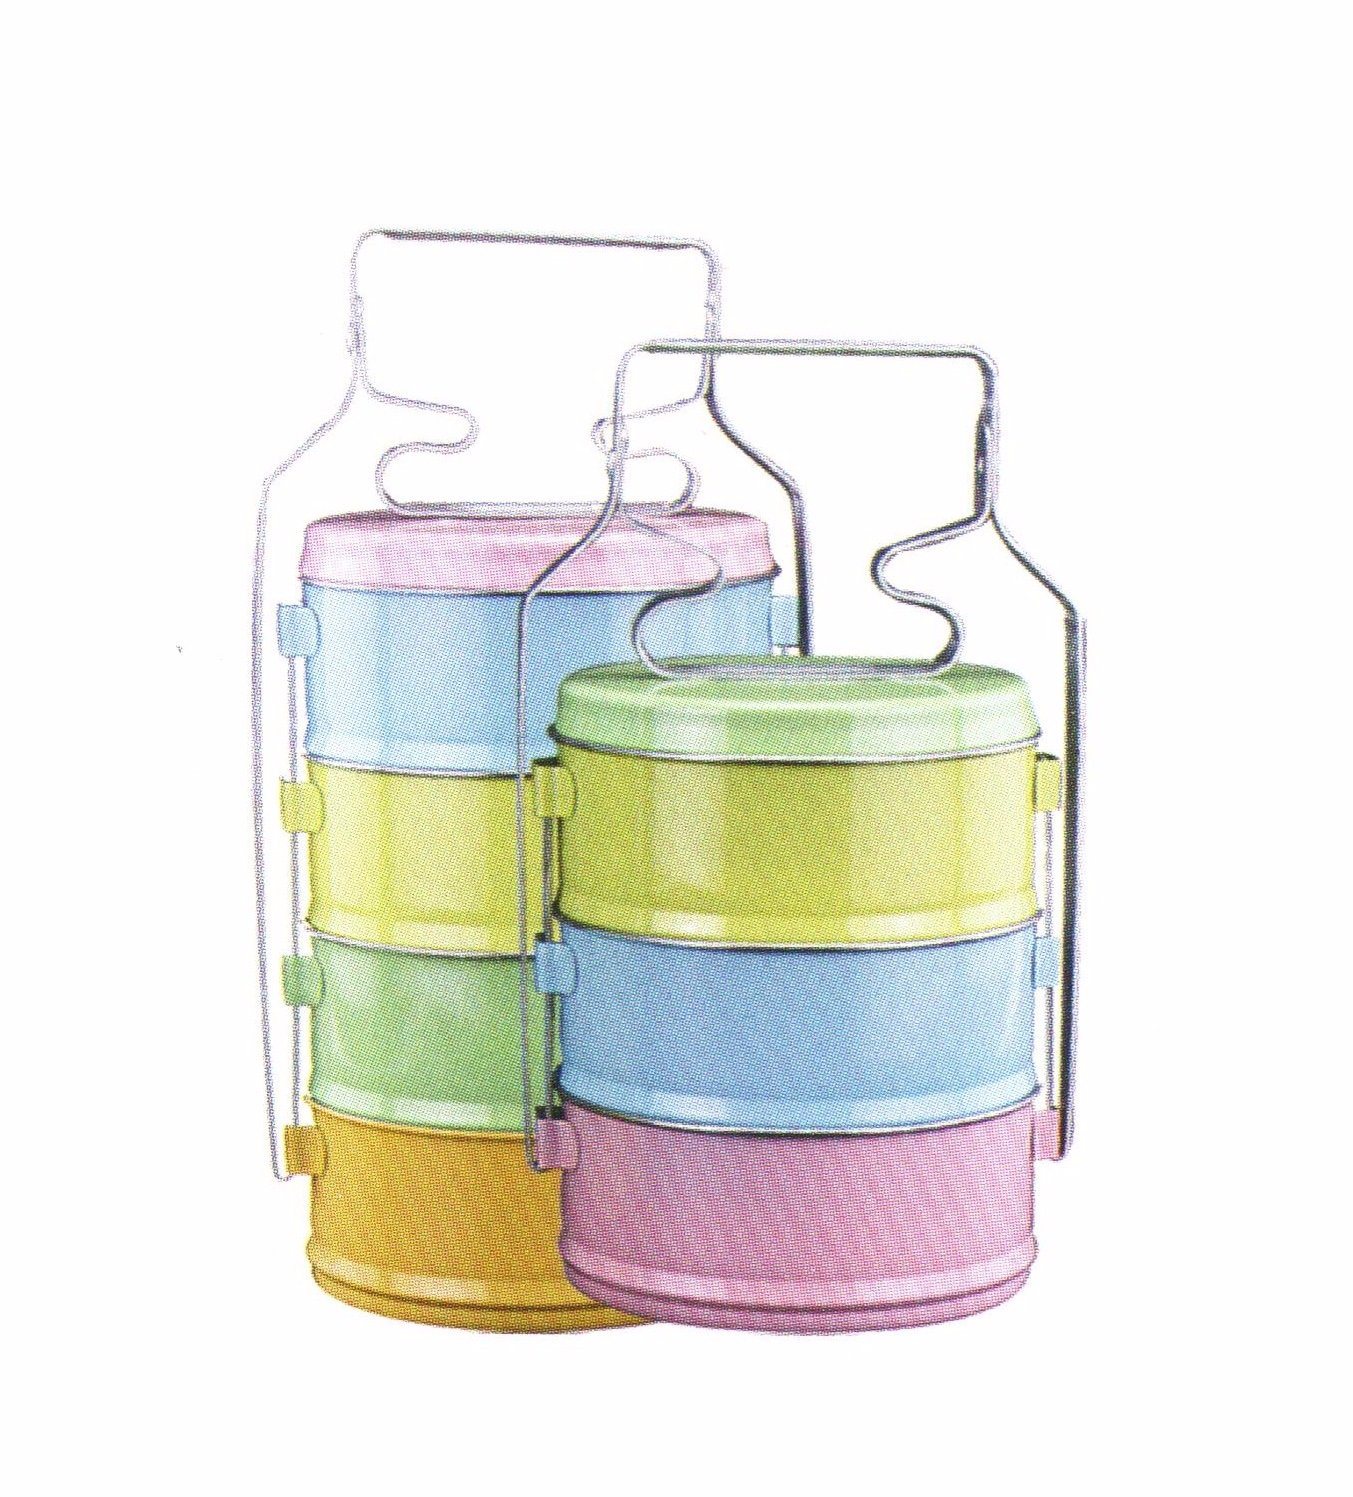 3-4 Layers Stainless Steel Lunch Box Food Carrier Lb004